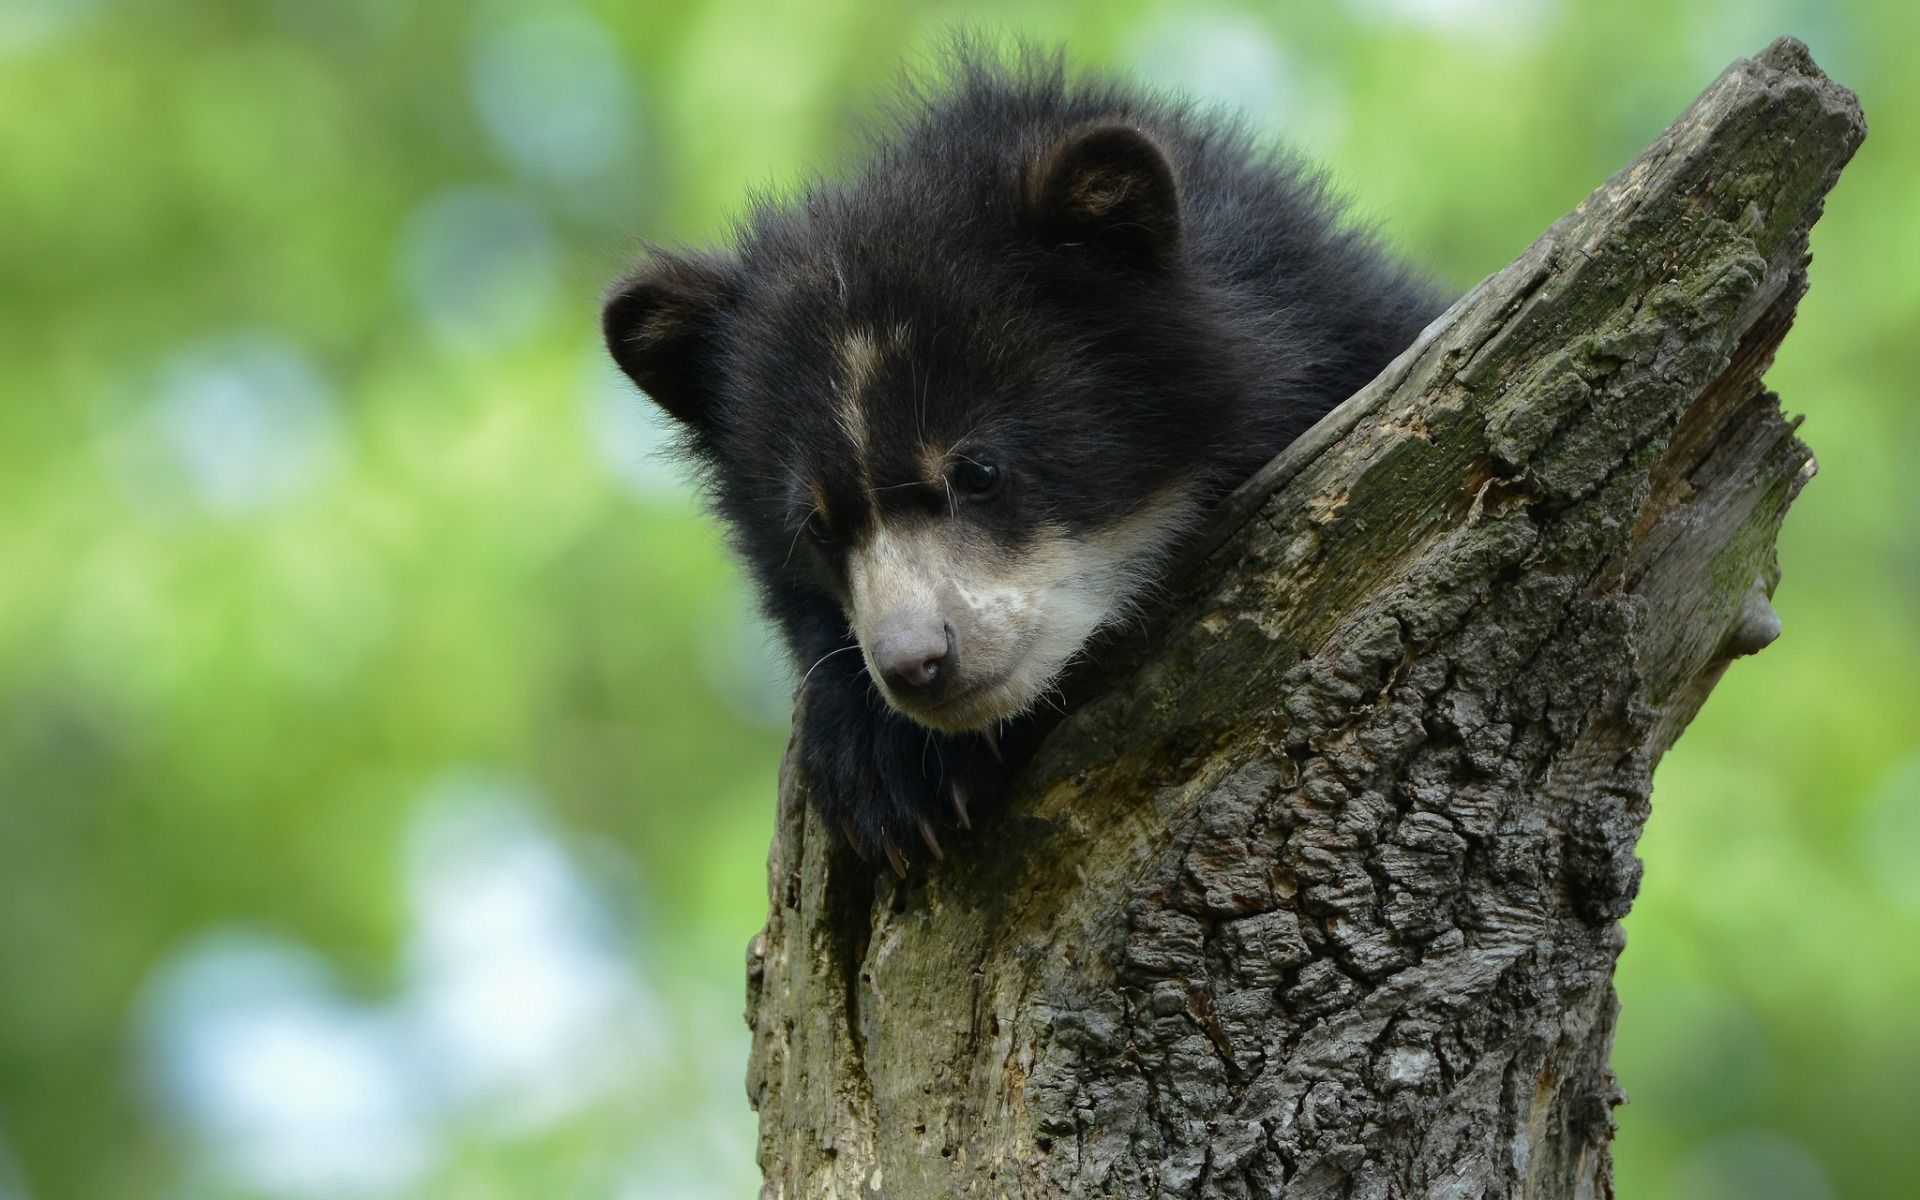 Download wallpaper small black bear cub, baribal, wildlife, bears, cute animals for desktop with resolution 1920x1200. High Quality HD picture wallpaper